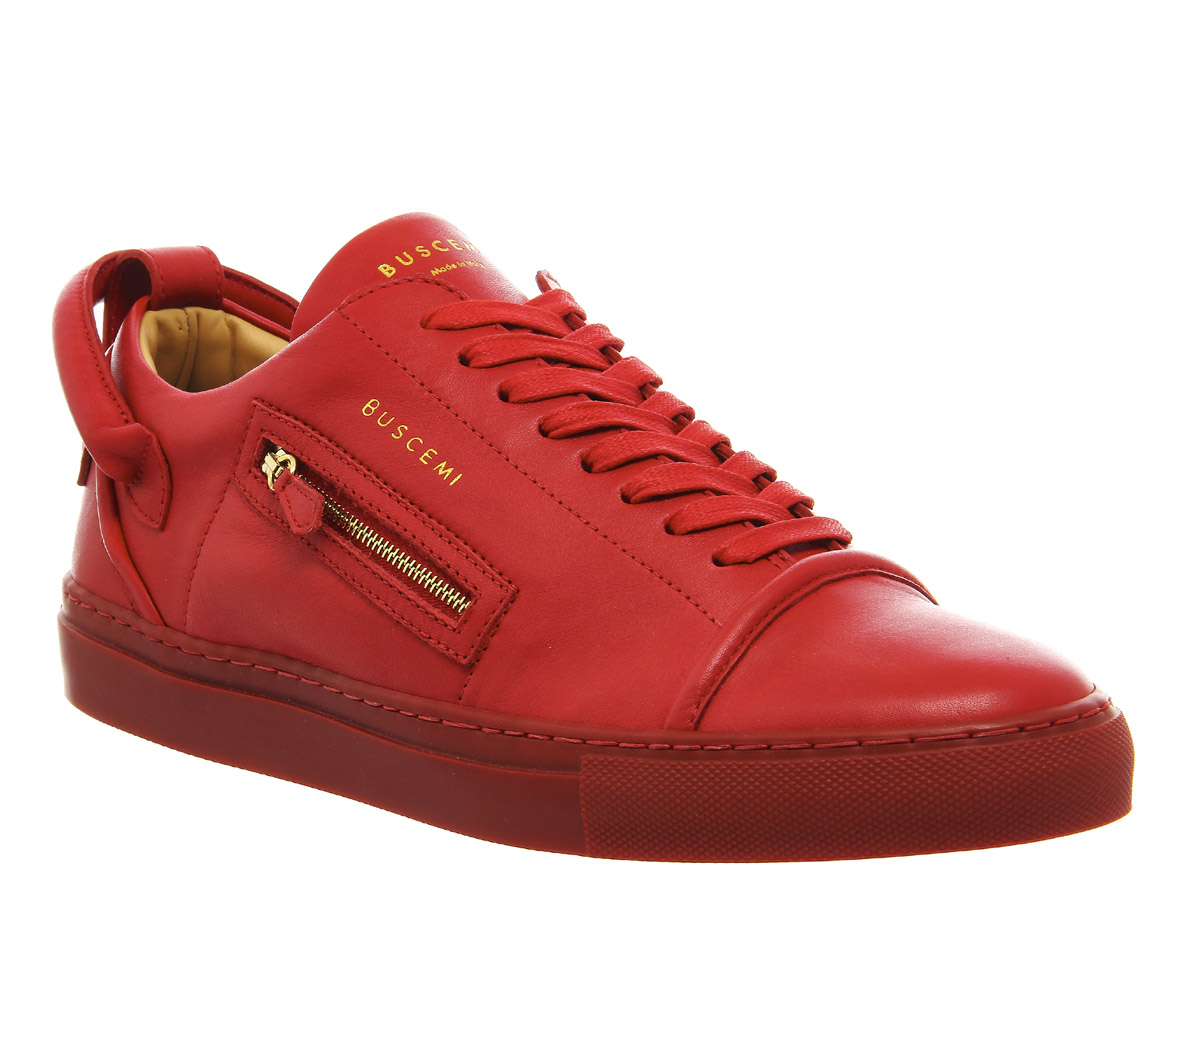 Buscemi 50mm LowRed Leather